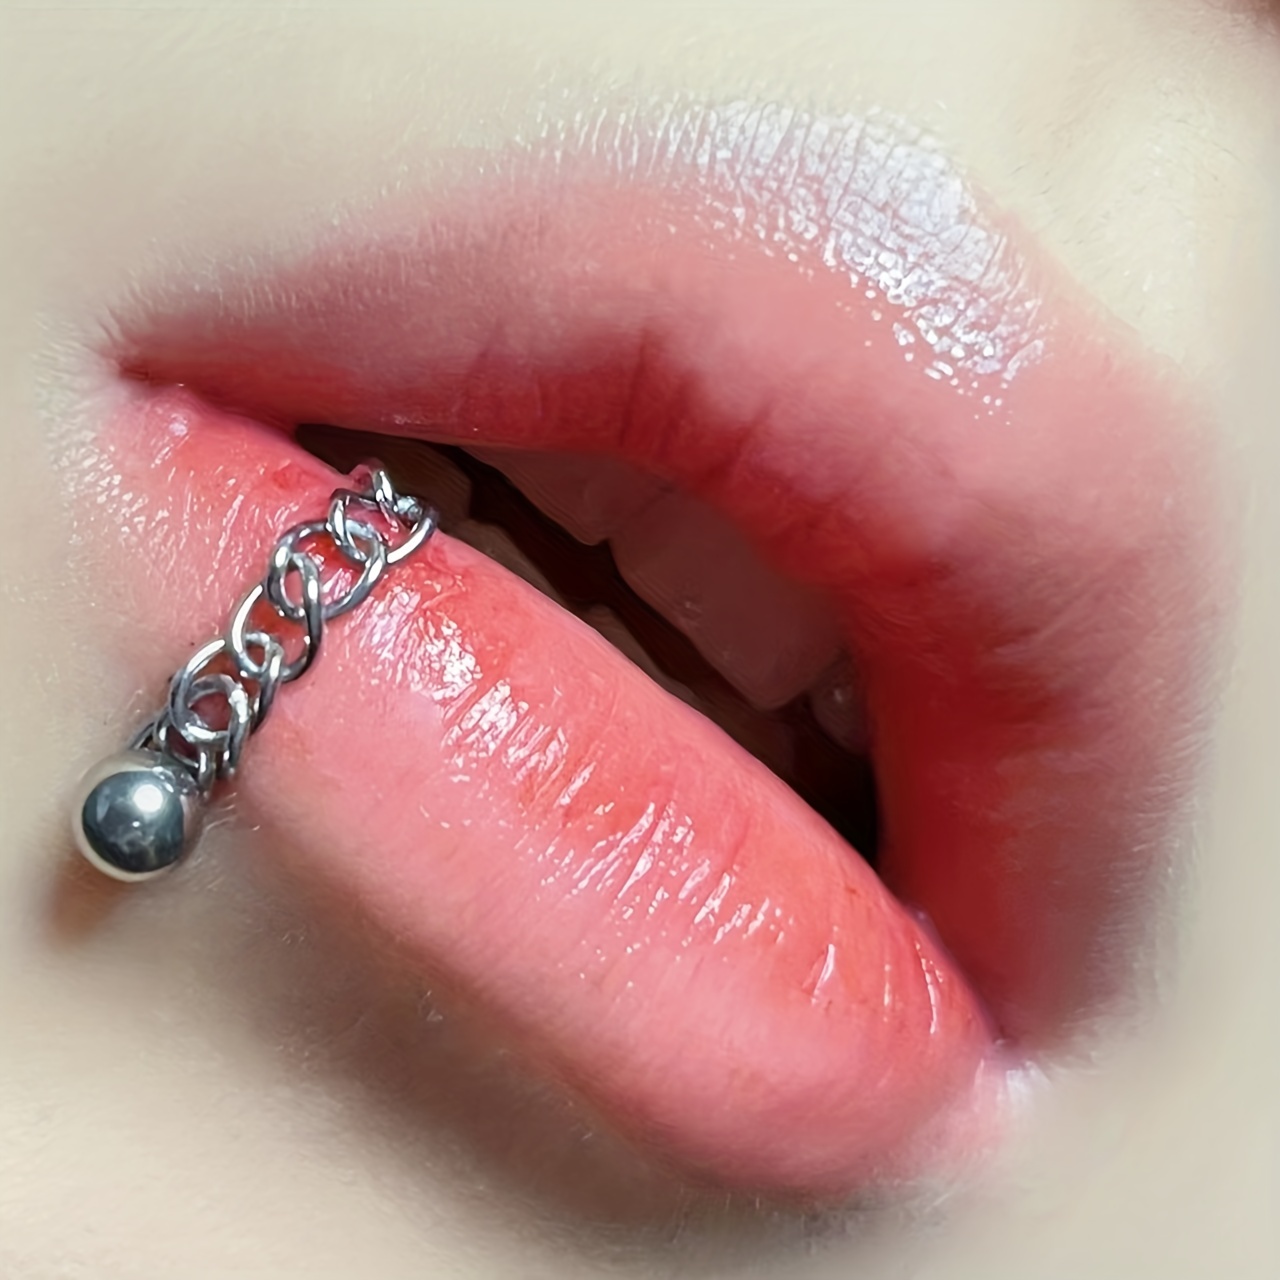 

1pc Chain Lip Ring Piercing Labret Stud Earrings Cartilage Helix Tragus Stainless Steel Bar Detachable Body Jewelry